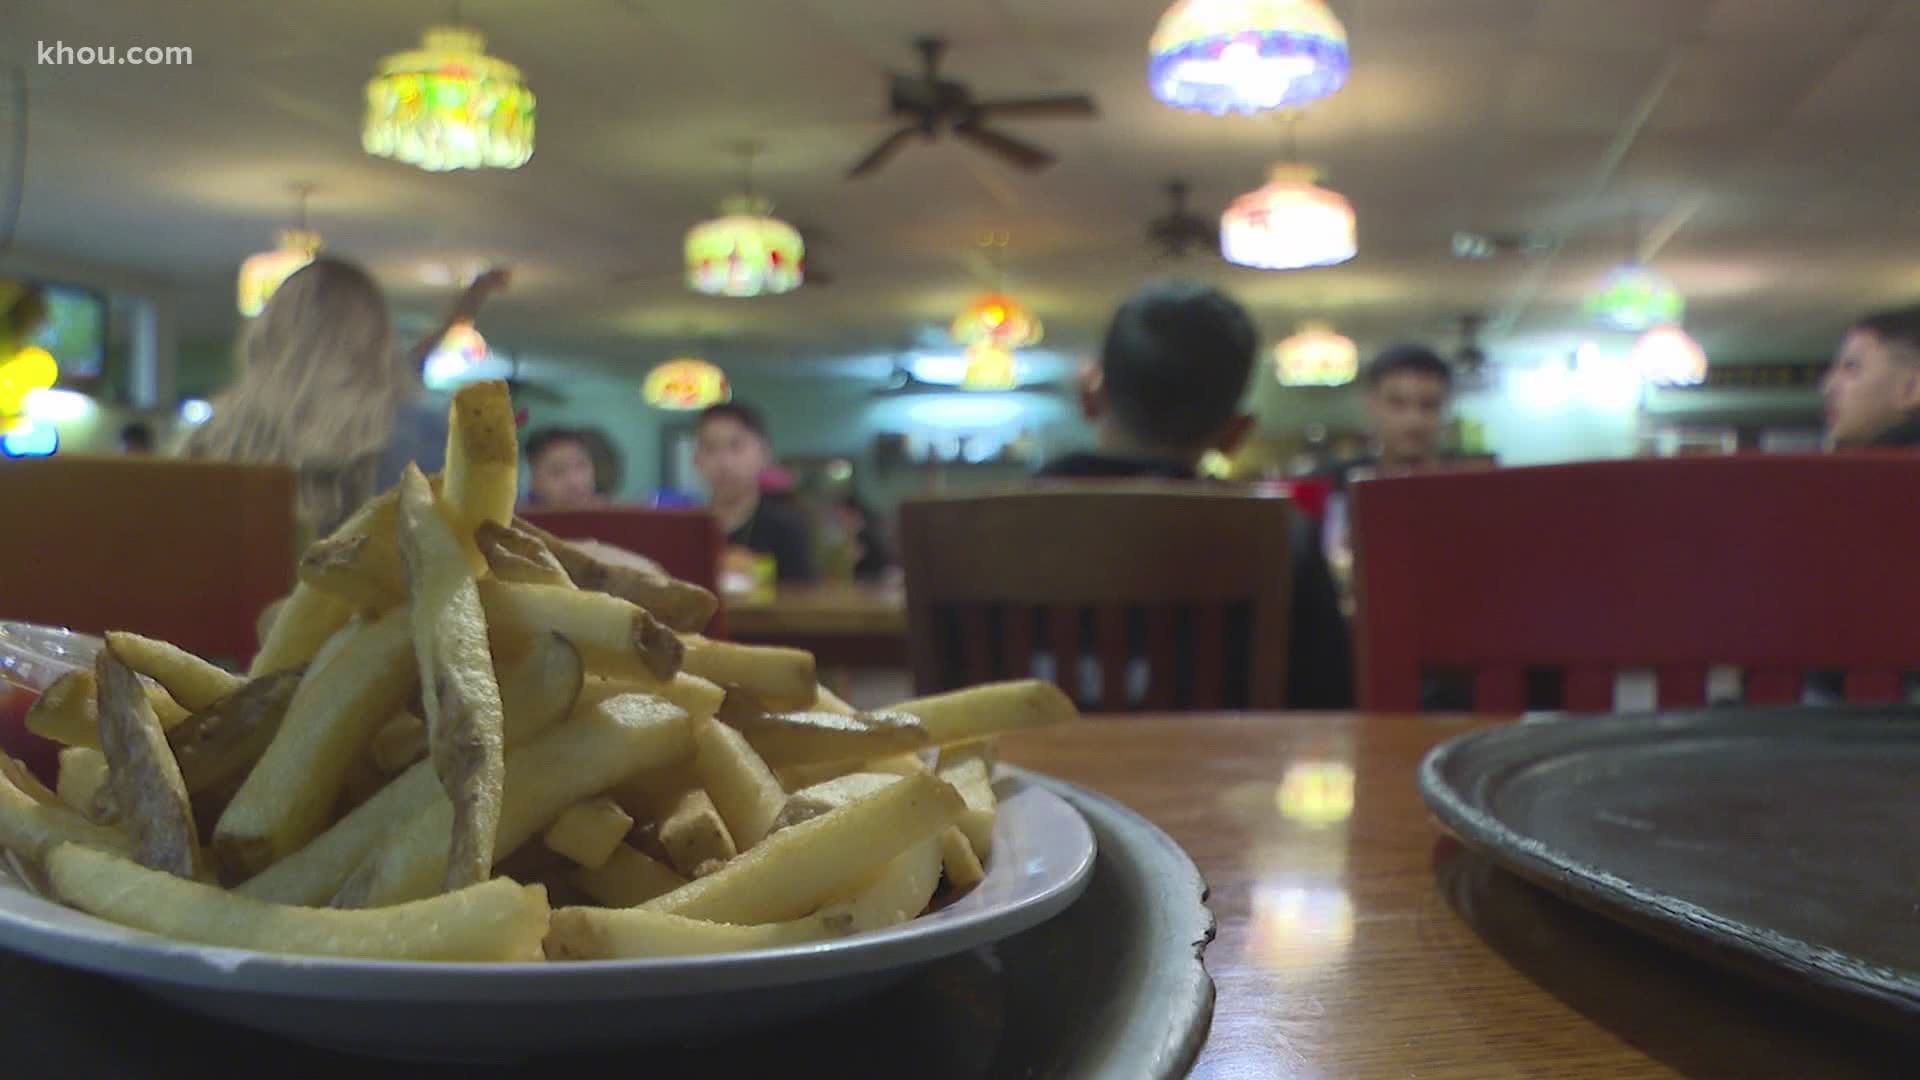 Small businesses are trying to make ends meet during the pandemic. The Potatoe Patch, a Houston landmark known for giving, is now getting a little support.